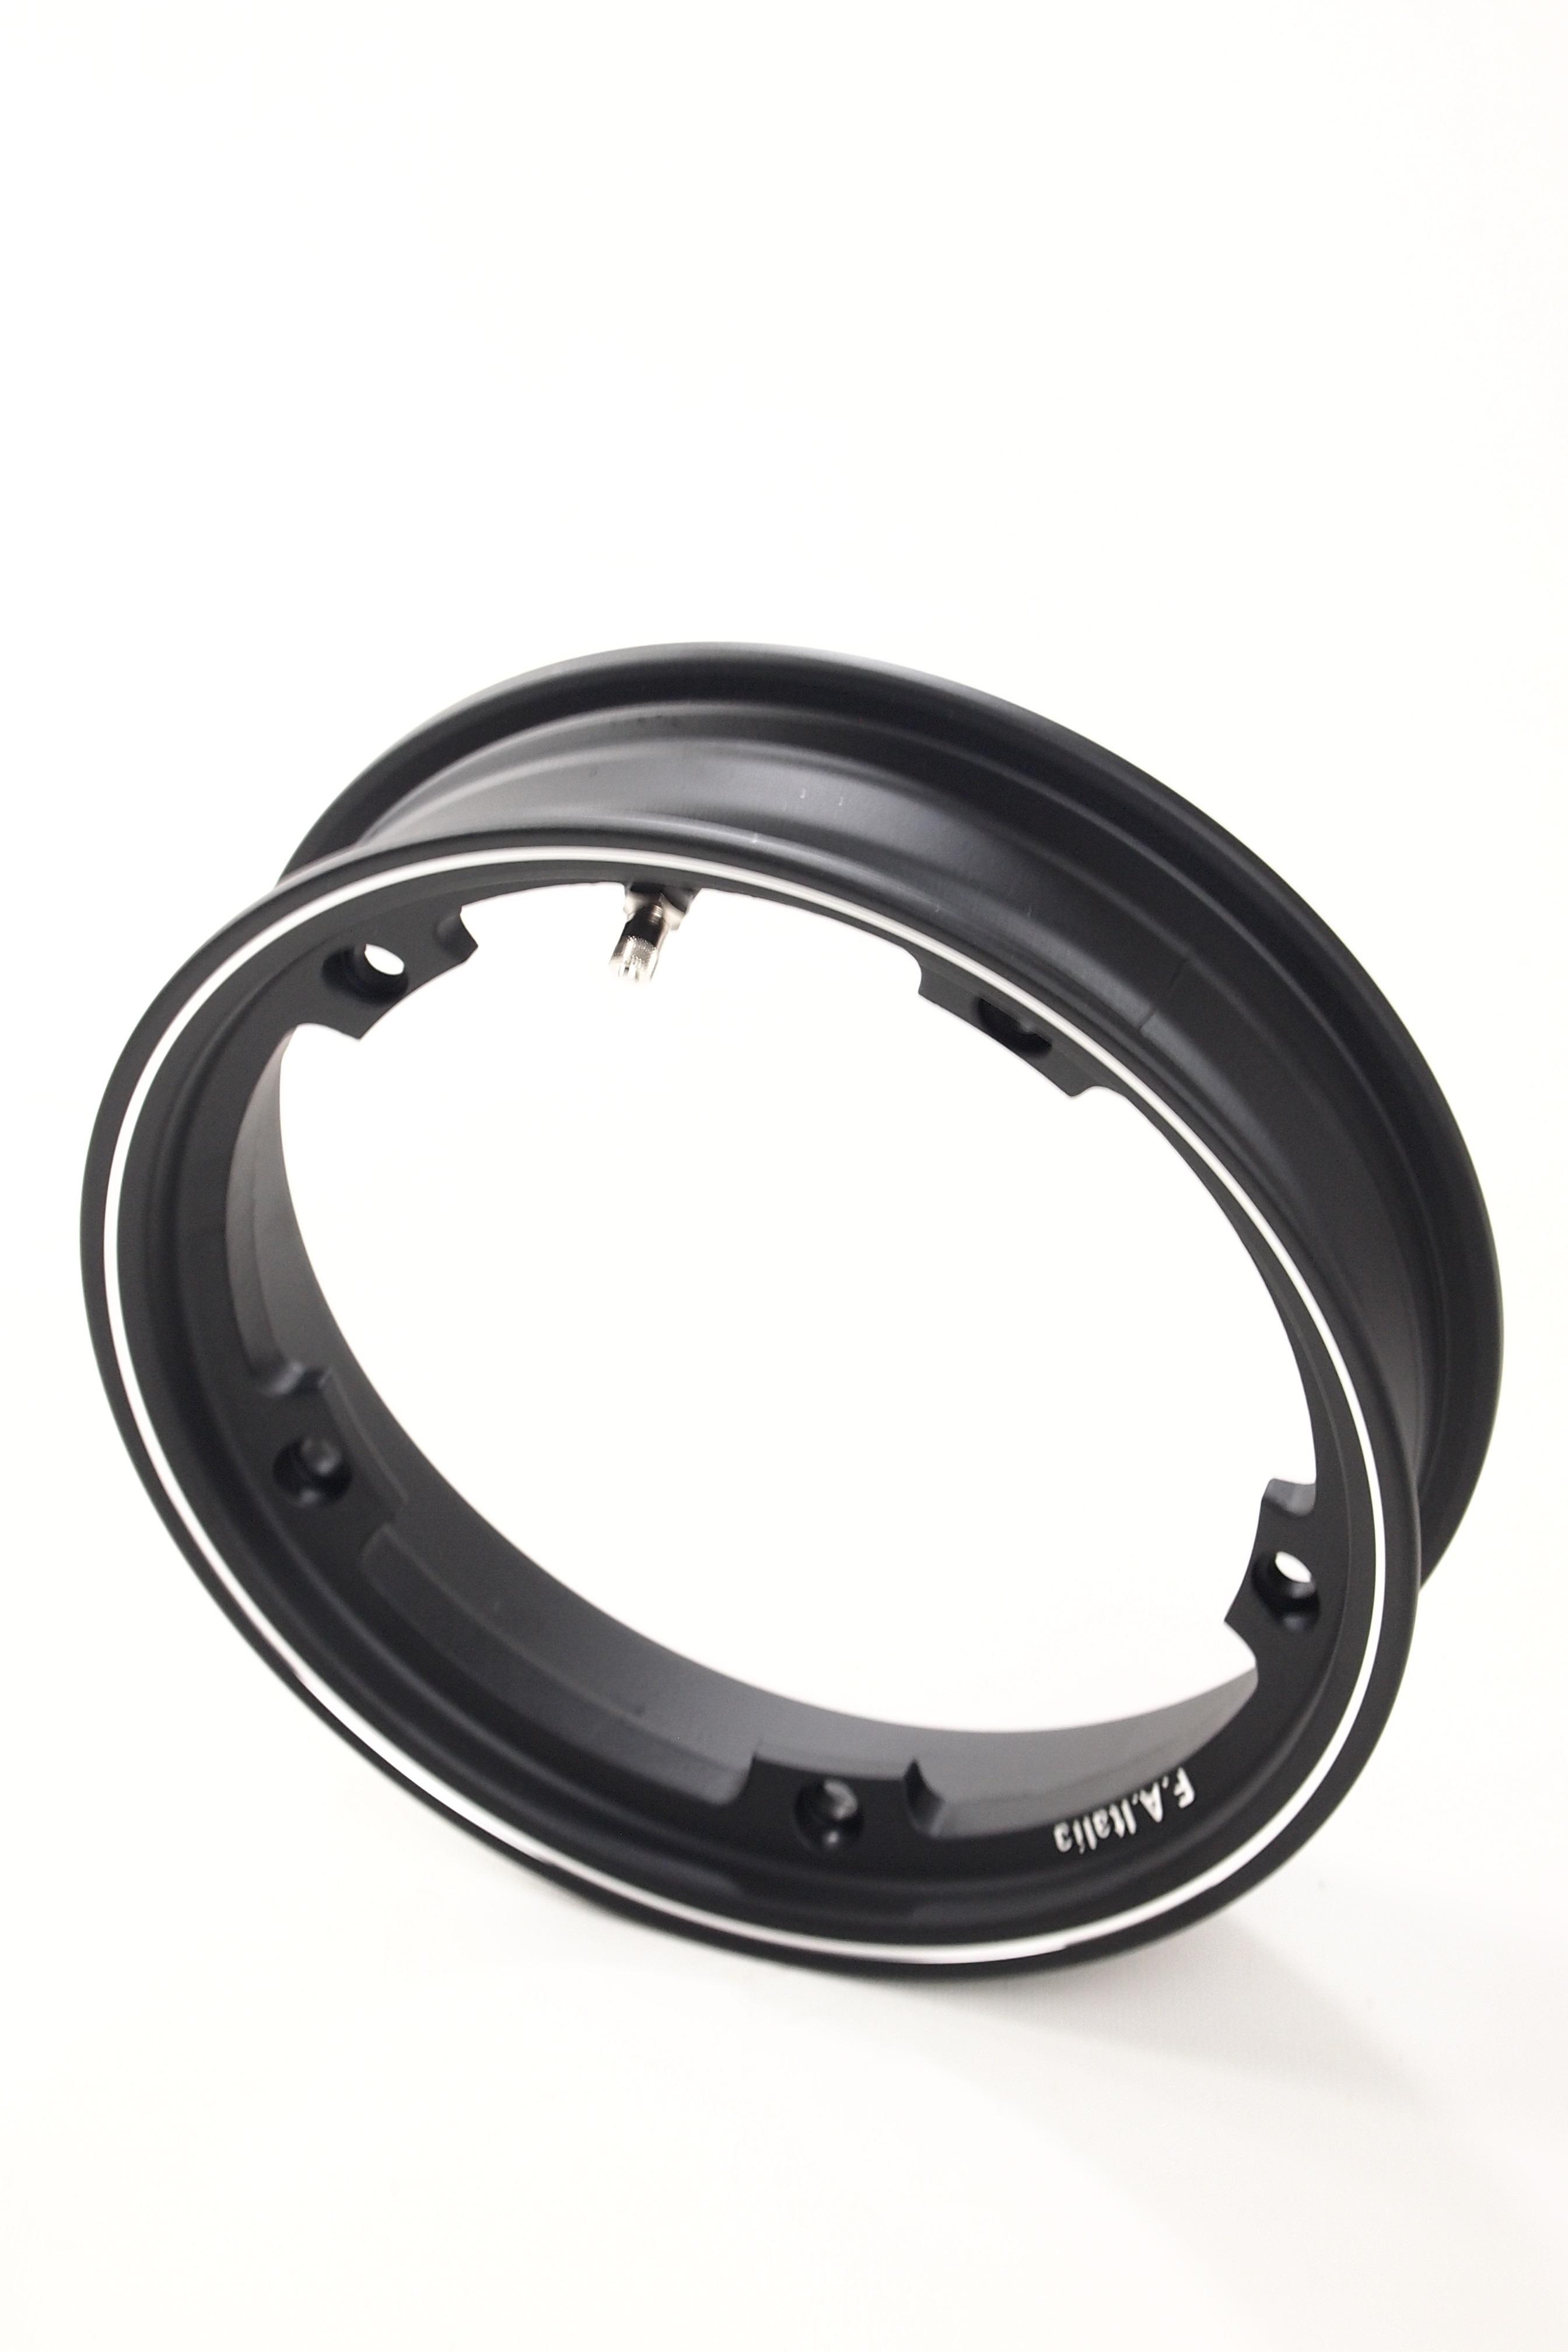 Tubeless alloy rim 2.10x10 "black channel for Vespa PX - 50 - Primavera - ET3 (valve and nuts included)